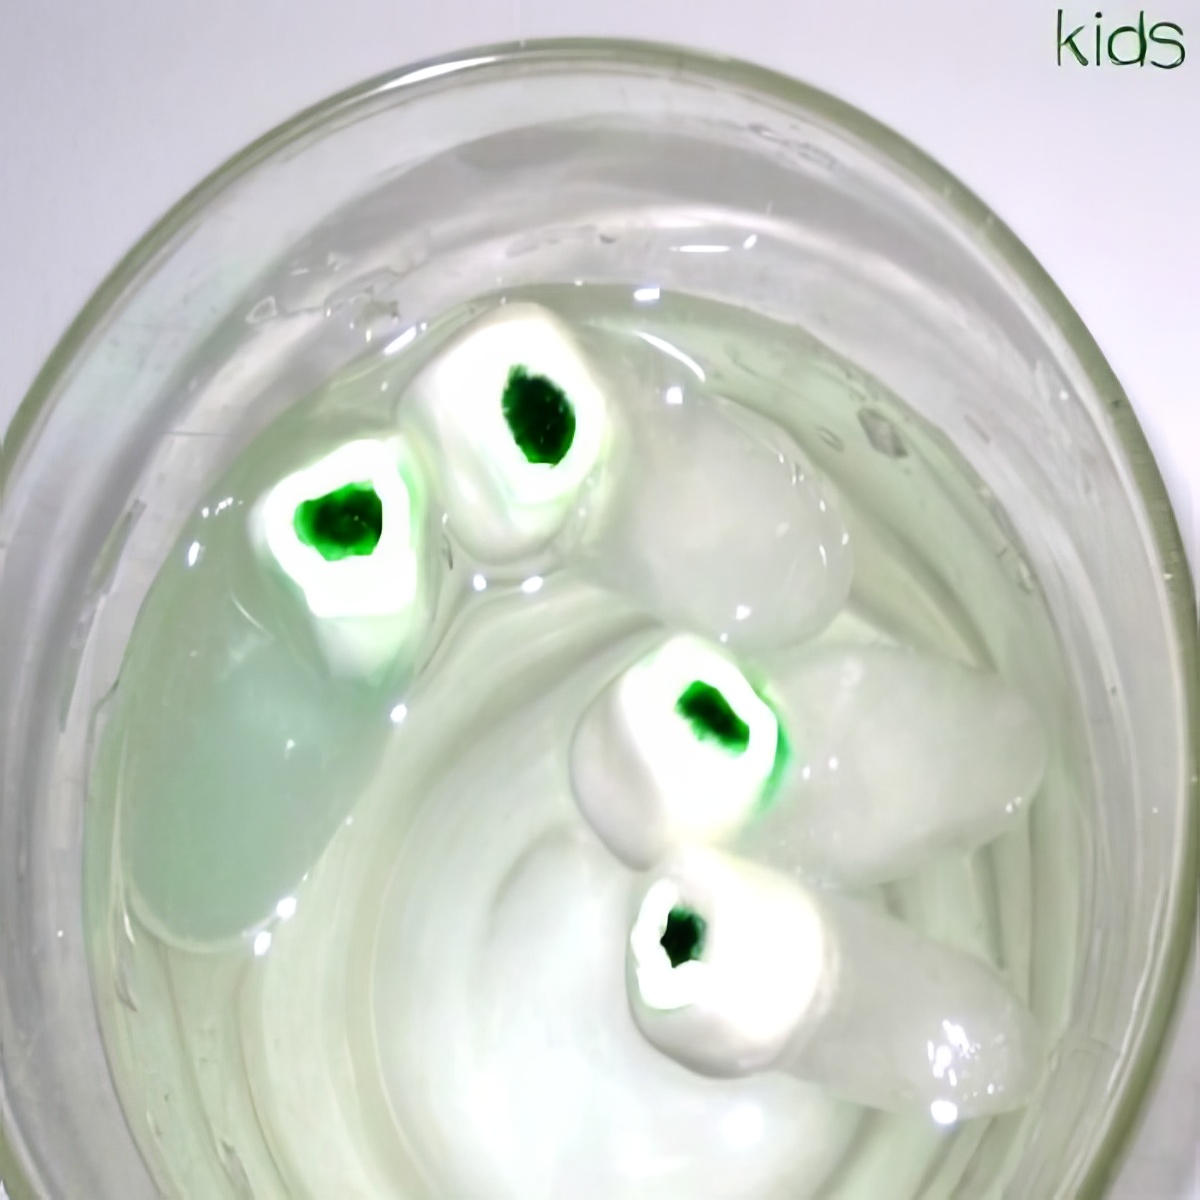 Turn ice cubes in to ice balls this April Fools!